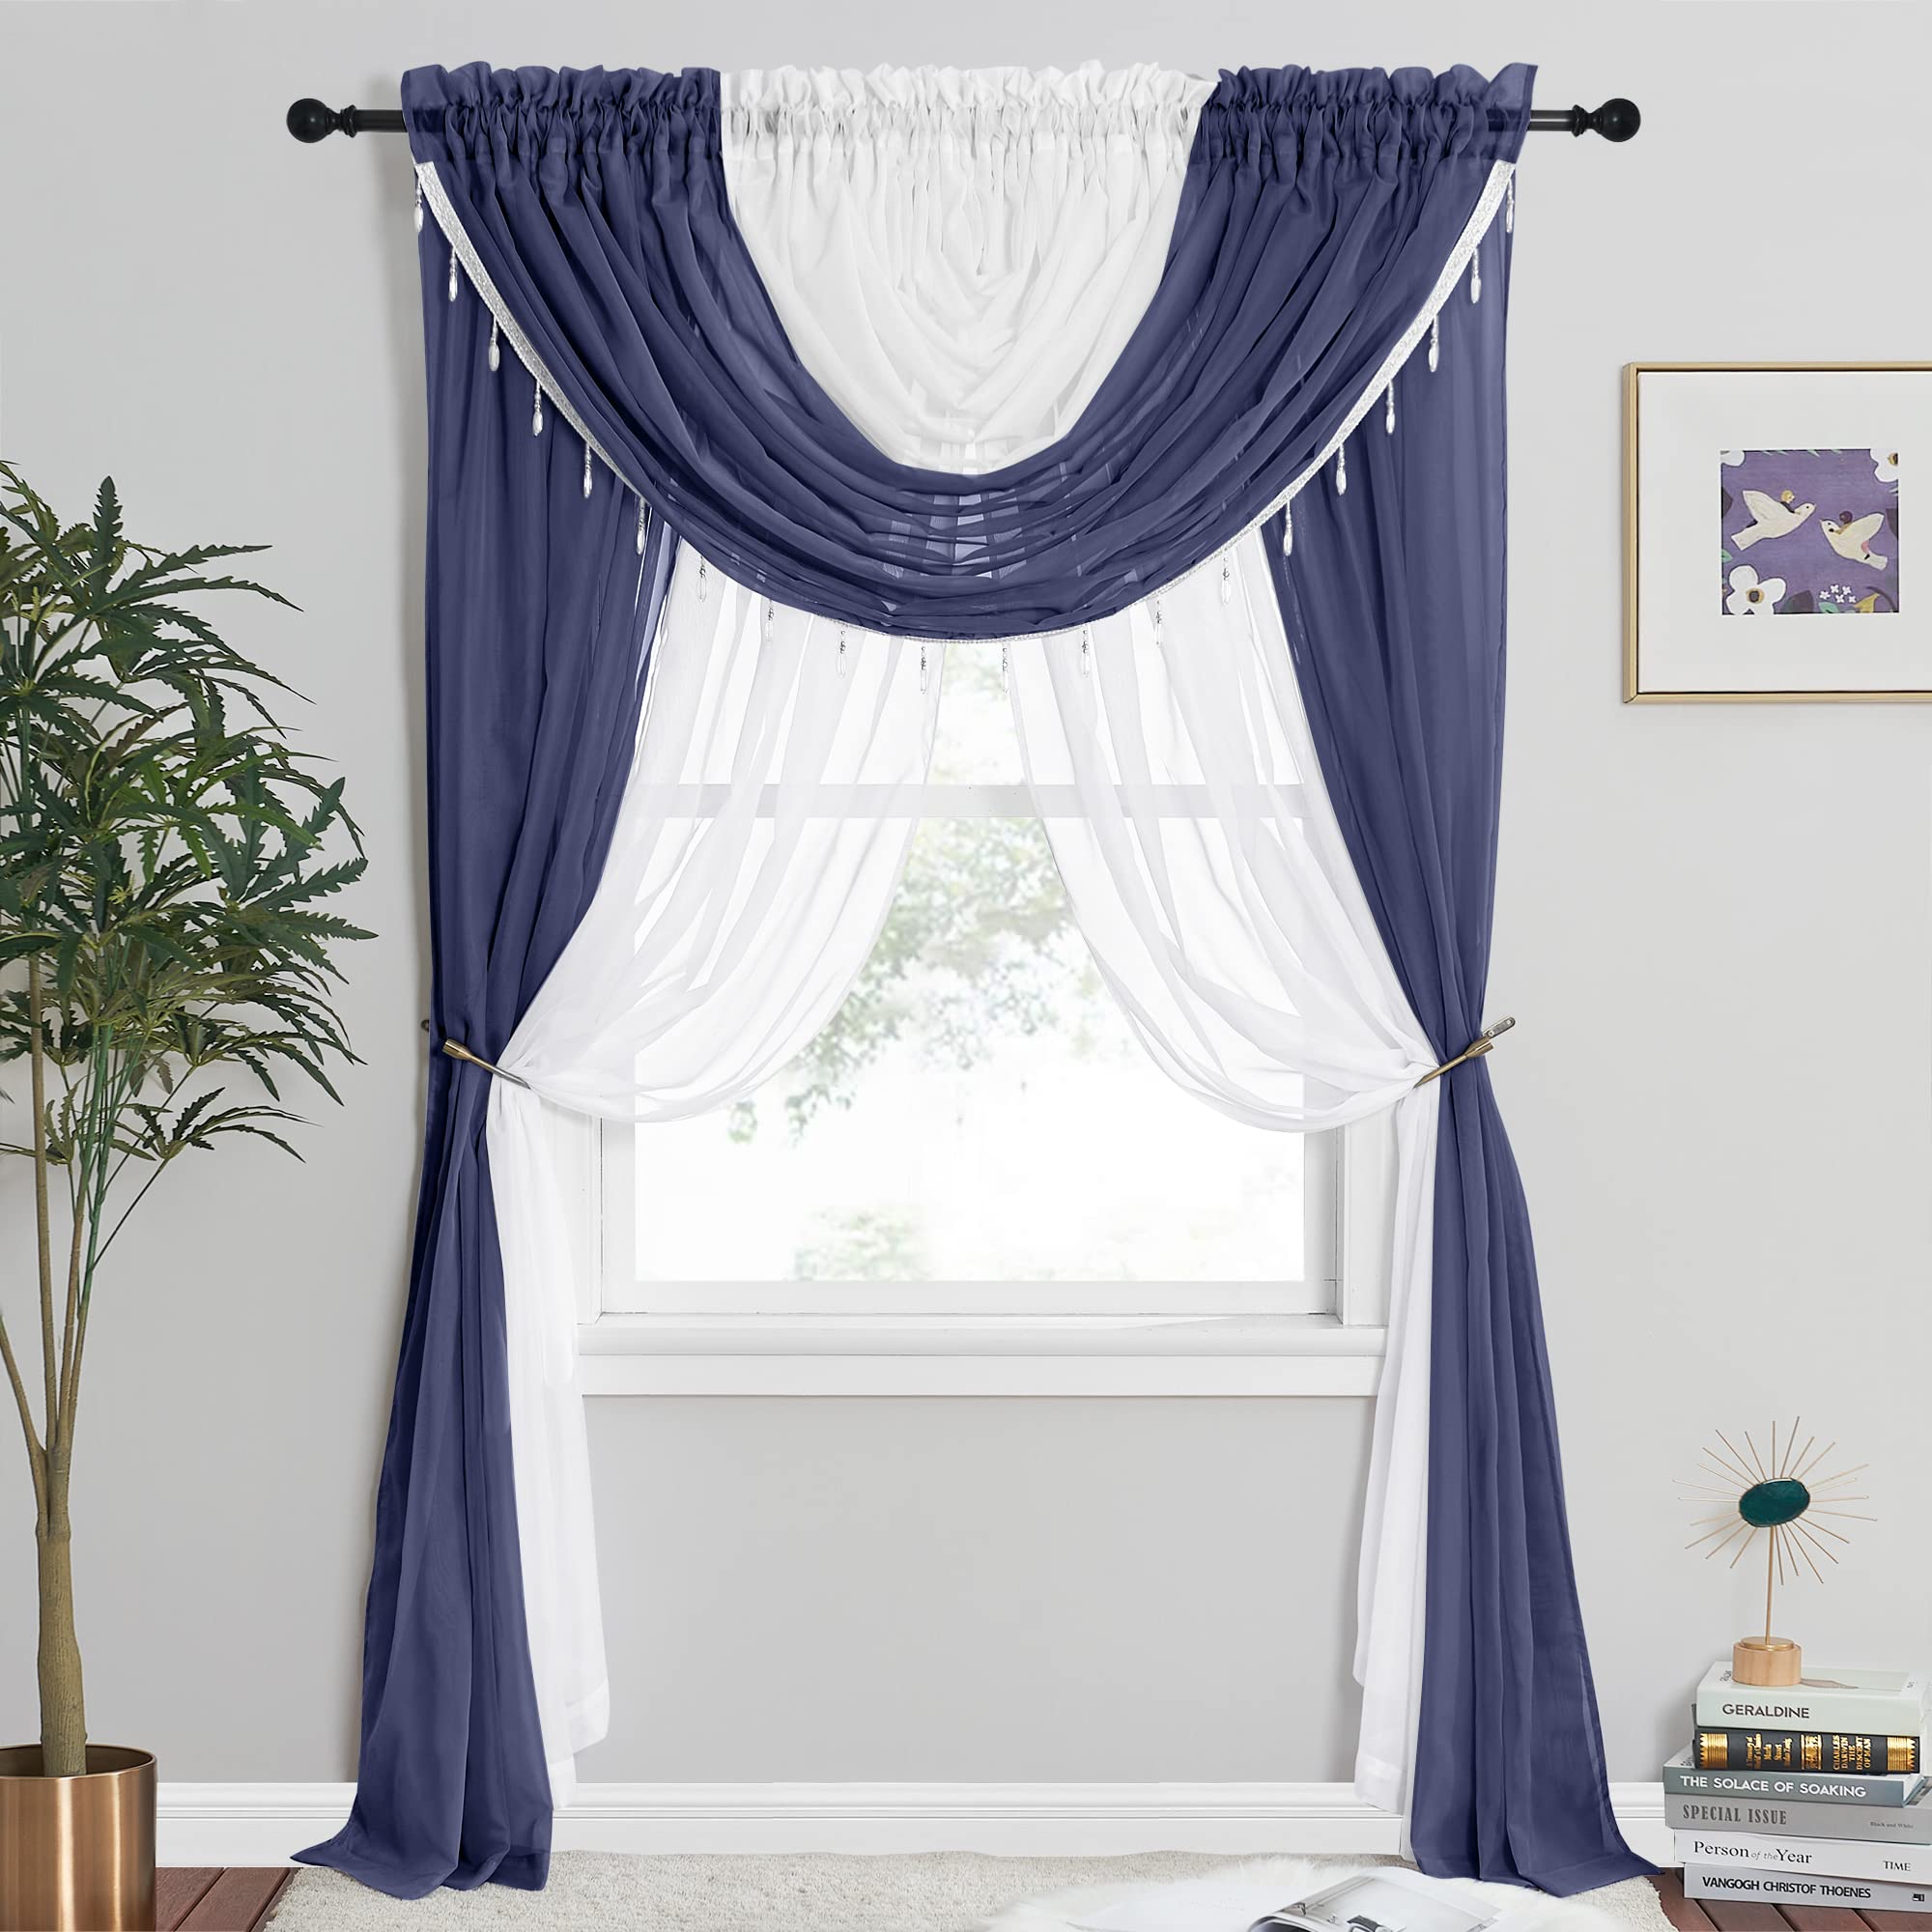 Window Sheer All-in-One Mix Match Voile Curtains Rod Pocket for Bedroom/LivingRoom, 4 Panels with 2 Waterfall Beads Valances